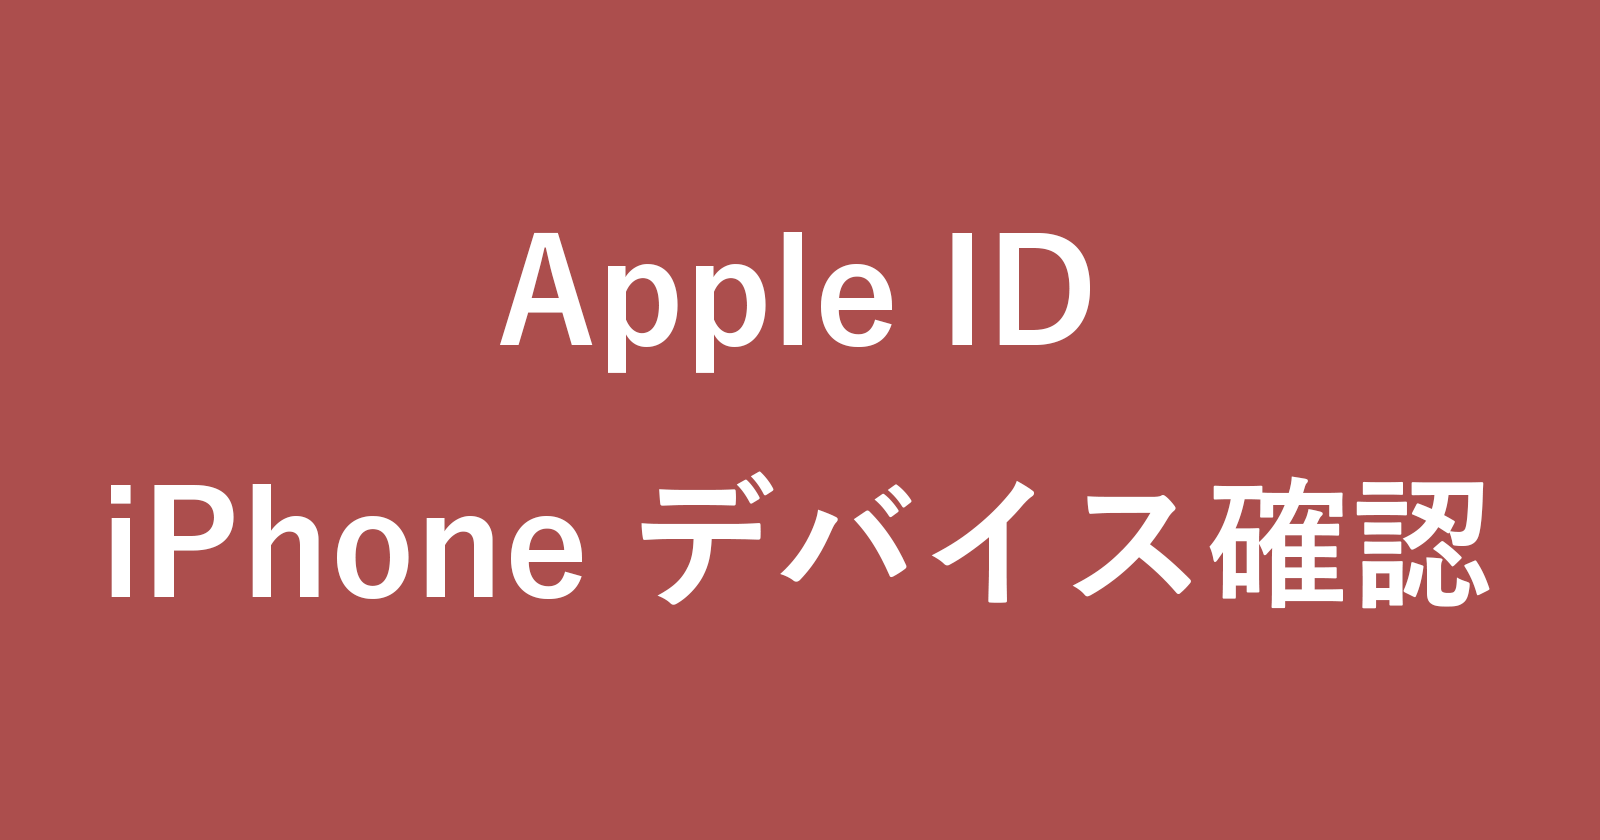 iphone apple id devices